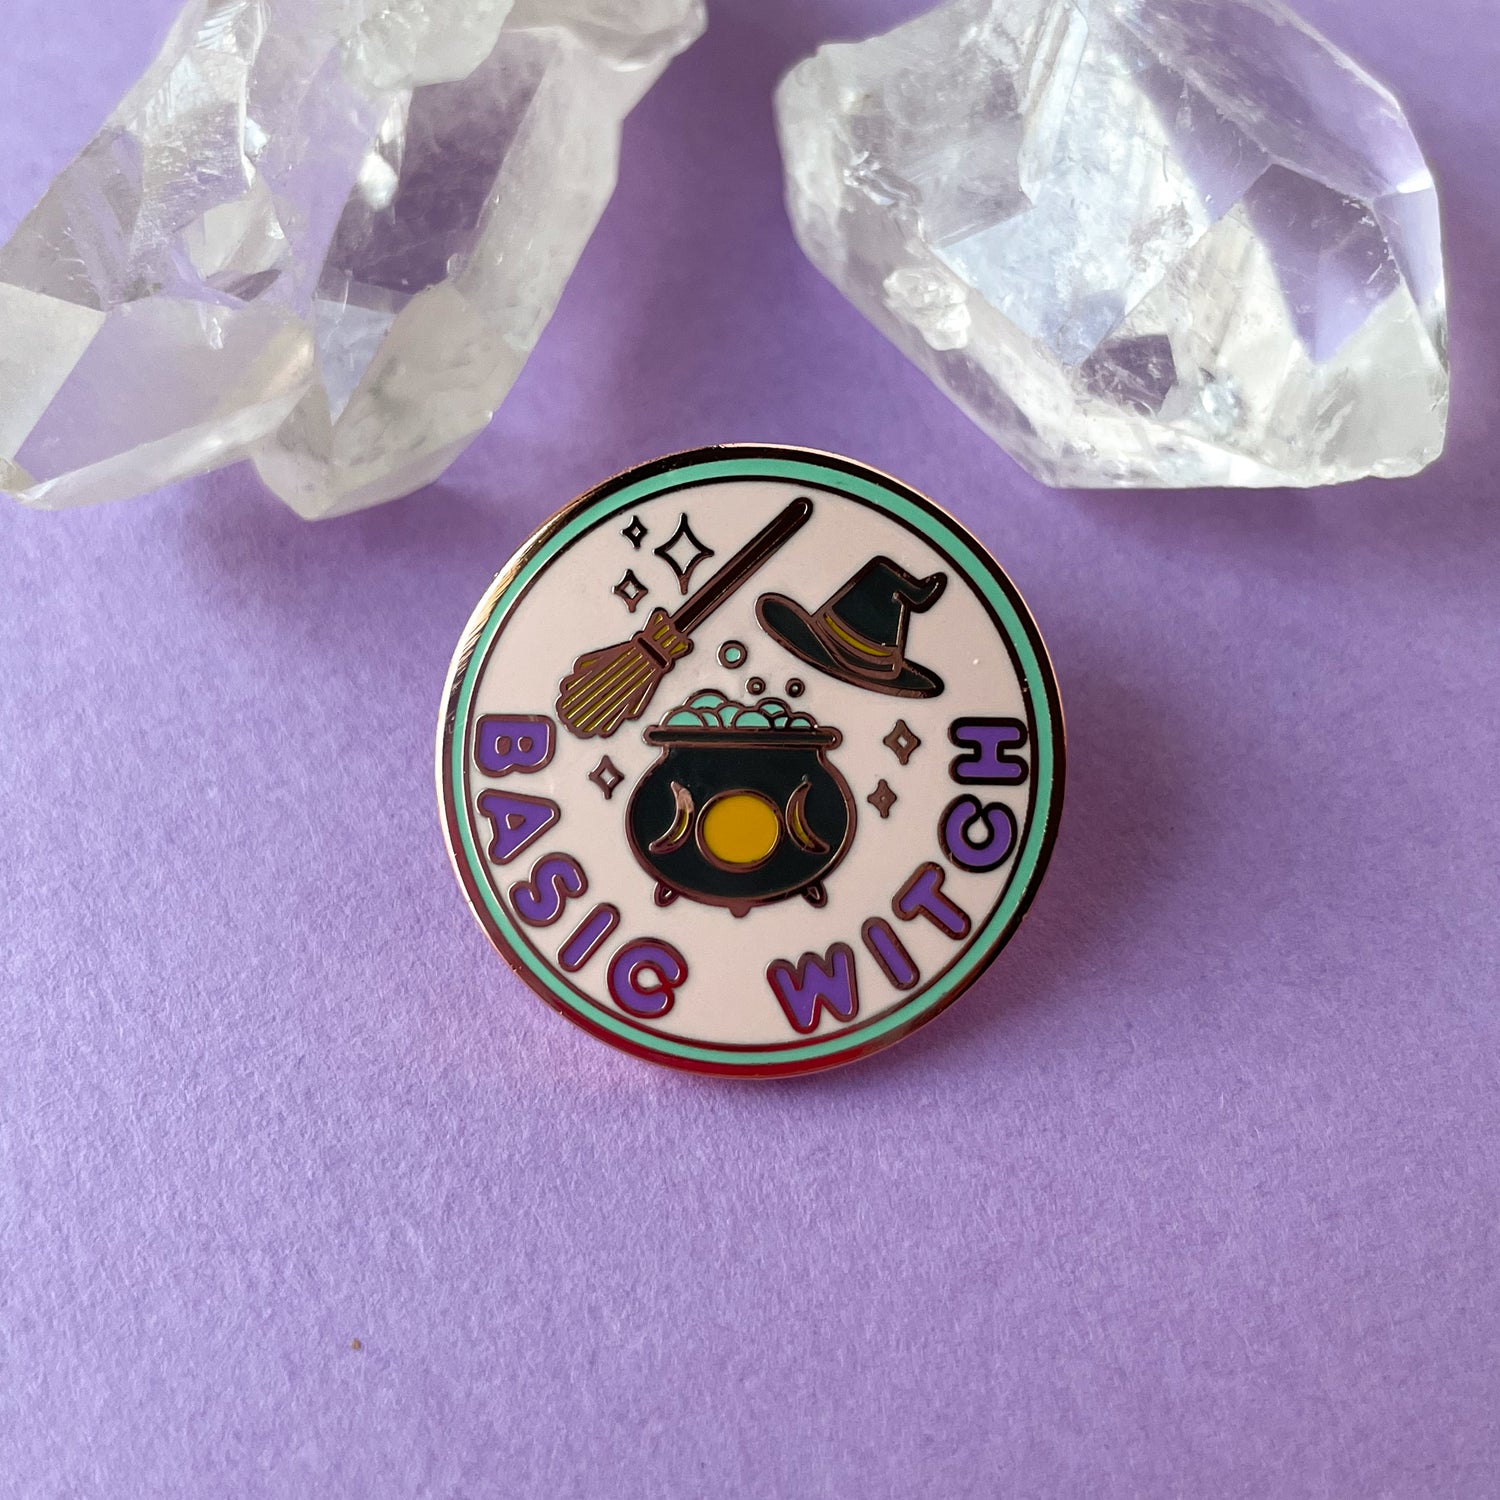 A circular hard enamel pin with rose gold metal. There is a mint green border around a pastel pink circle in the background. The bottom of the pin has bubble letters in purple that read "Basic Witch" above this there is a black cauldron with yellow moon phases full of bubbles. There is a broom above this and a black pointed hat to the right of the broom. Sparkles are around all of the objects. This pin is on a purple paper background with some quartz crystals in the background